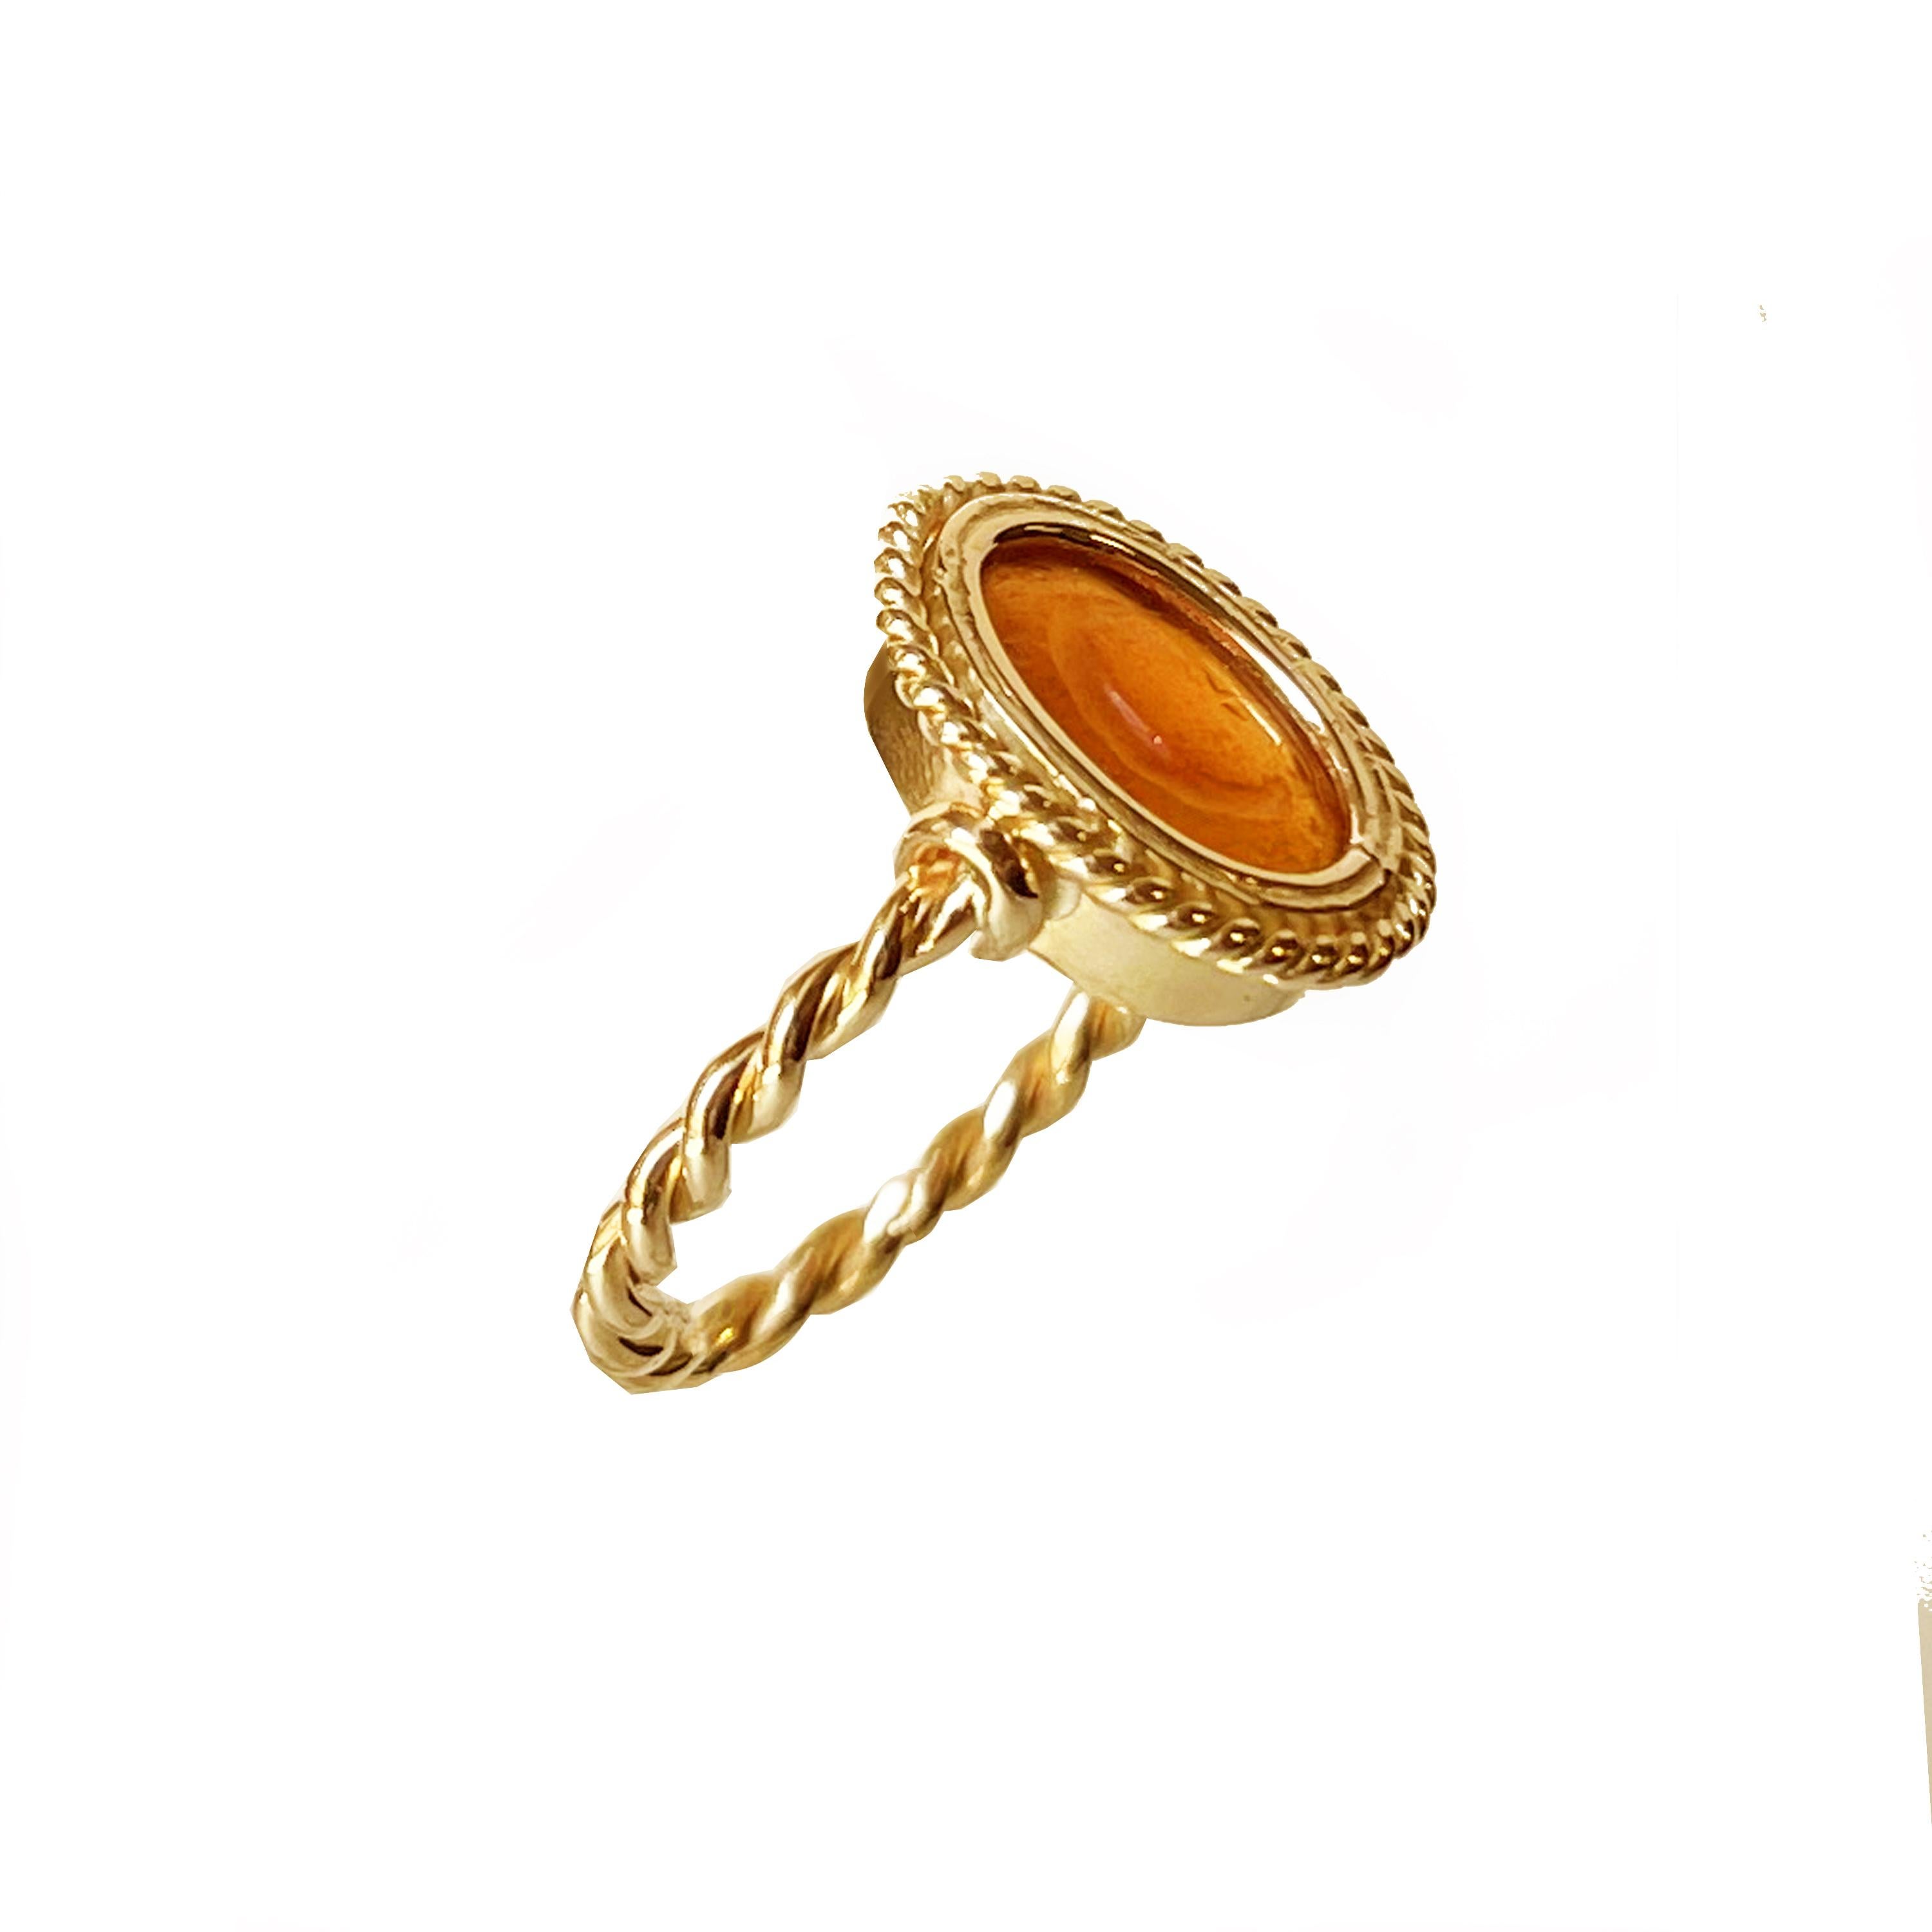 In this 18 Kt Gold ring a Roman carnelian intaglio depicting a crescent moon and 7 stars is set.
The Romans were convinced that the Sun and the Moon, like all the other stars and planets (seven were known at the time, while the other two, Neptune